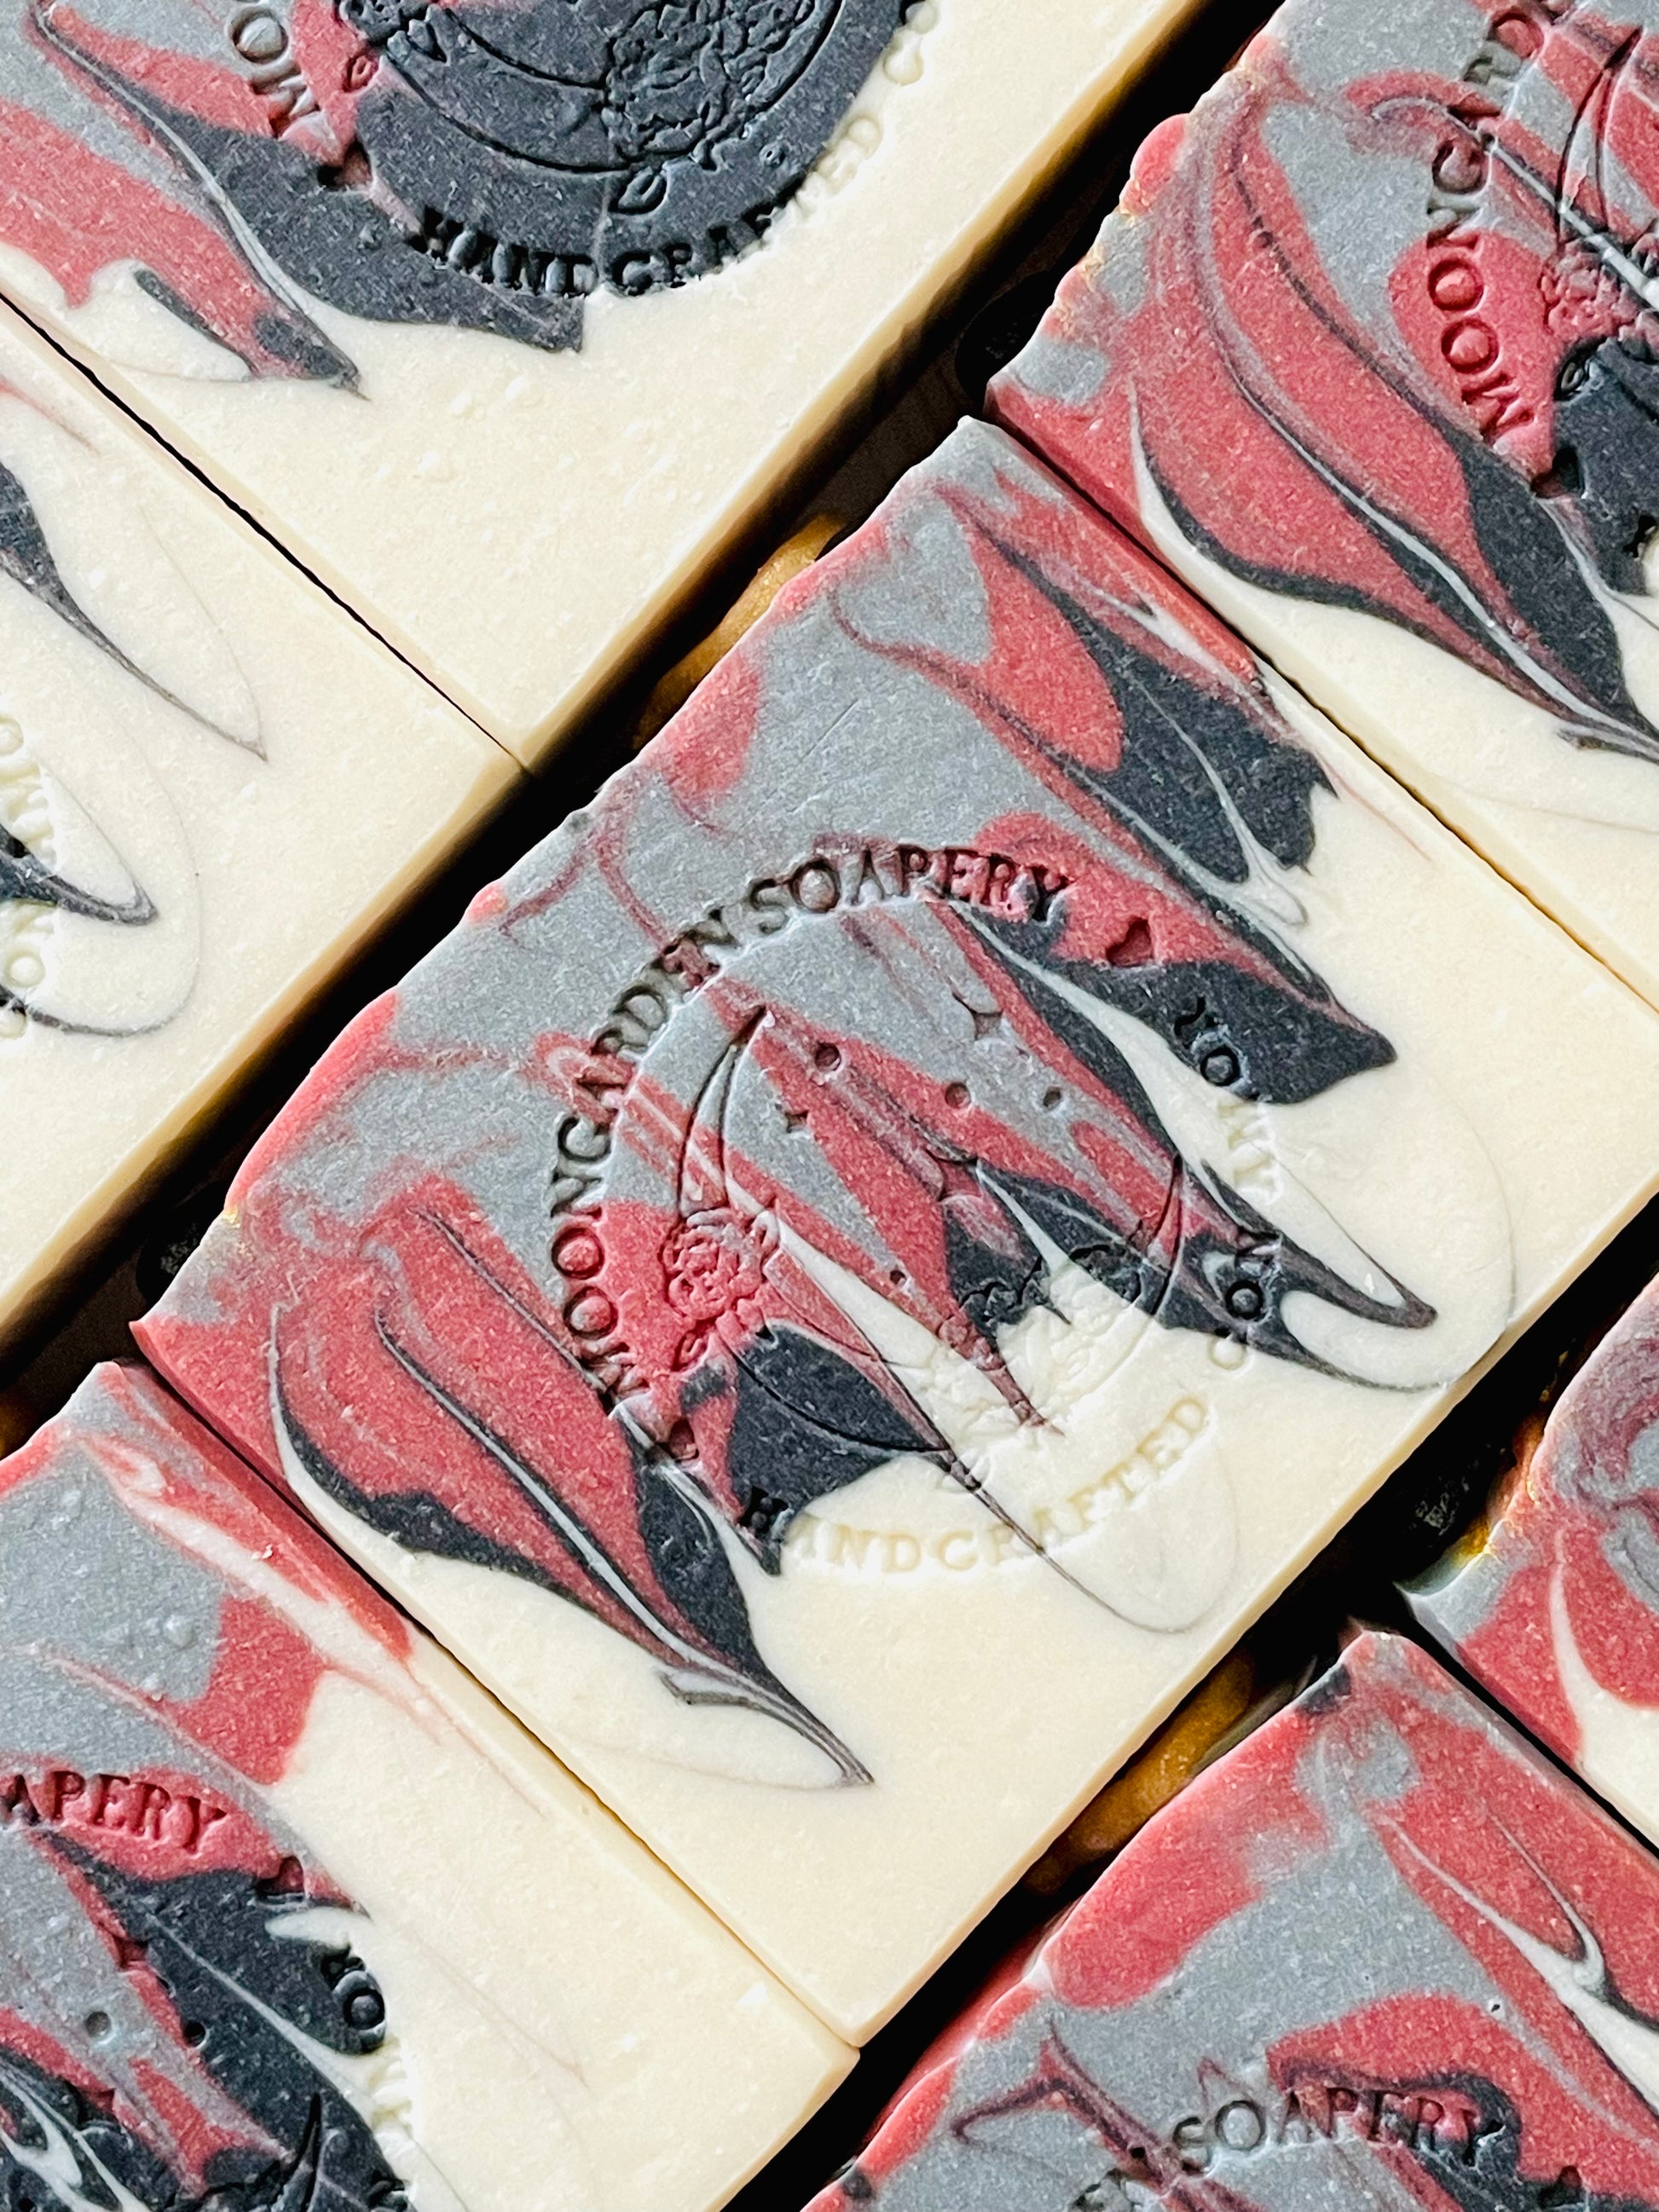 A closeup of Tommy Shelby bar soaps. 